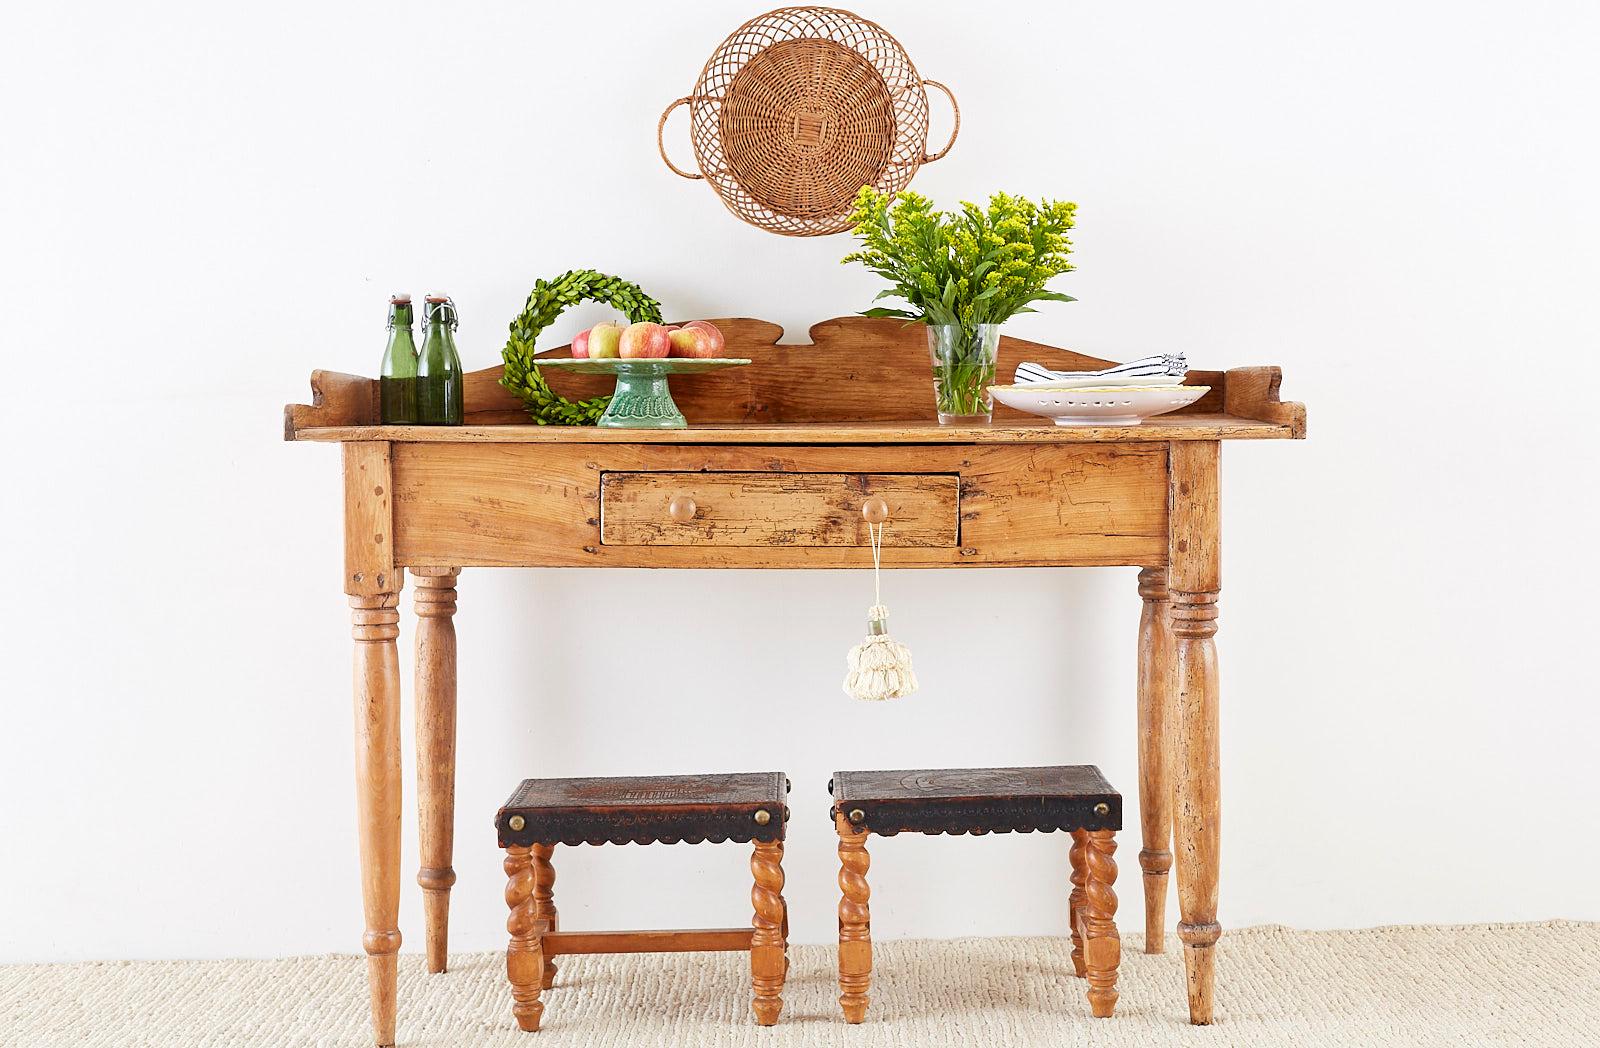 Rustic 19th century country French farmhouse pine server, sideboard or work table. Features a wood peg joinery construction with a beautifully distressed, aged patina on the pine. The top has a shaped, galleried edge in a washstand style. Fronted by